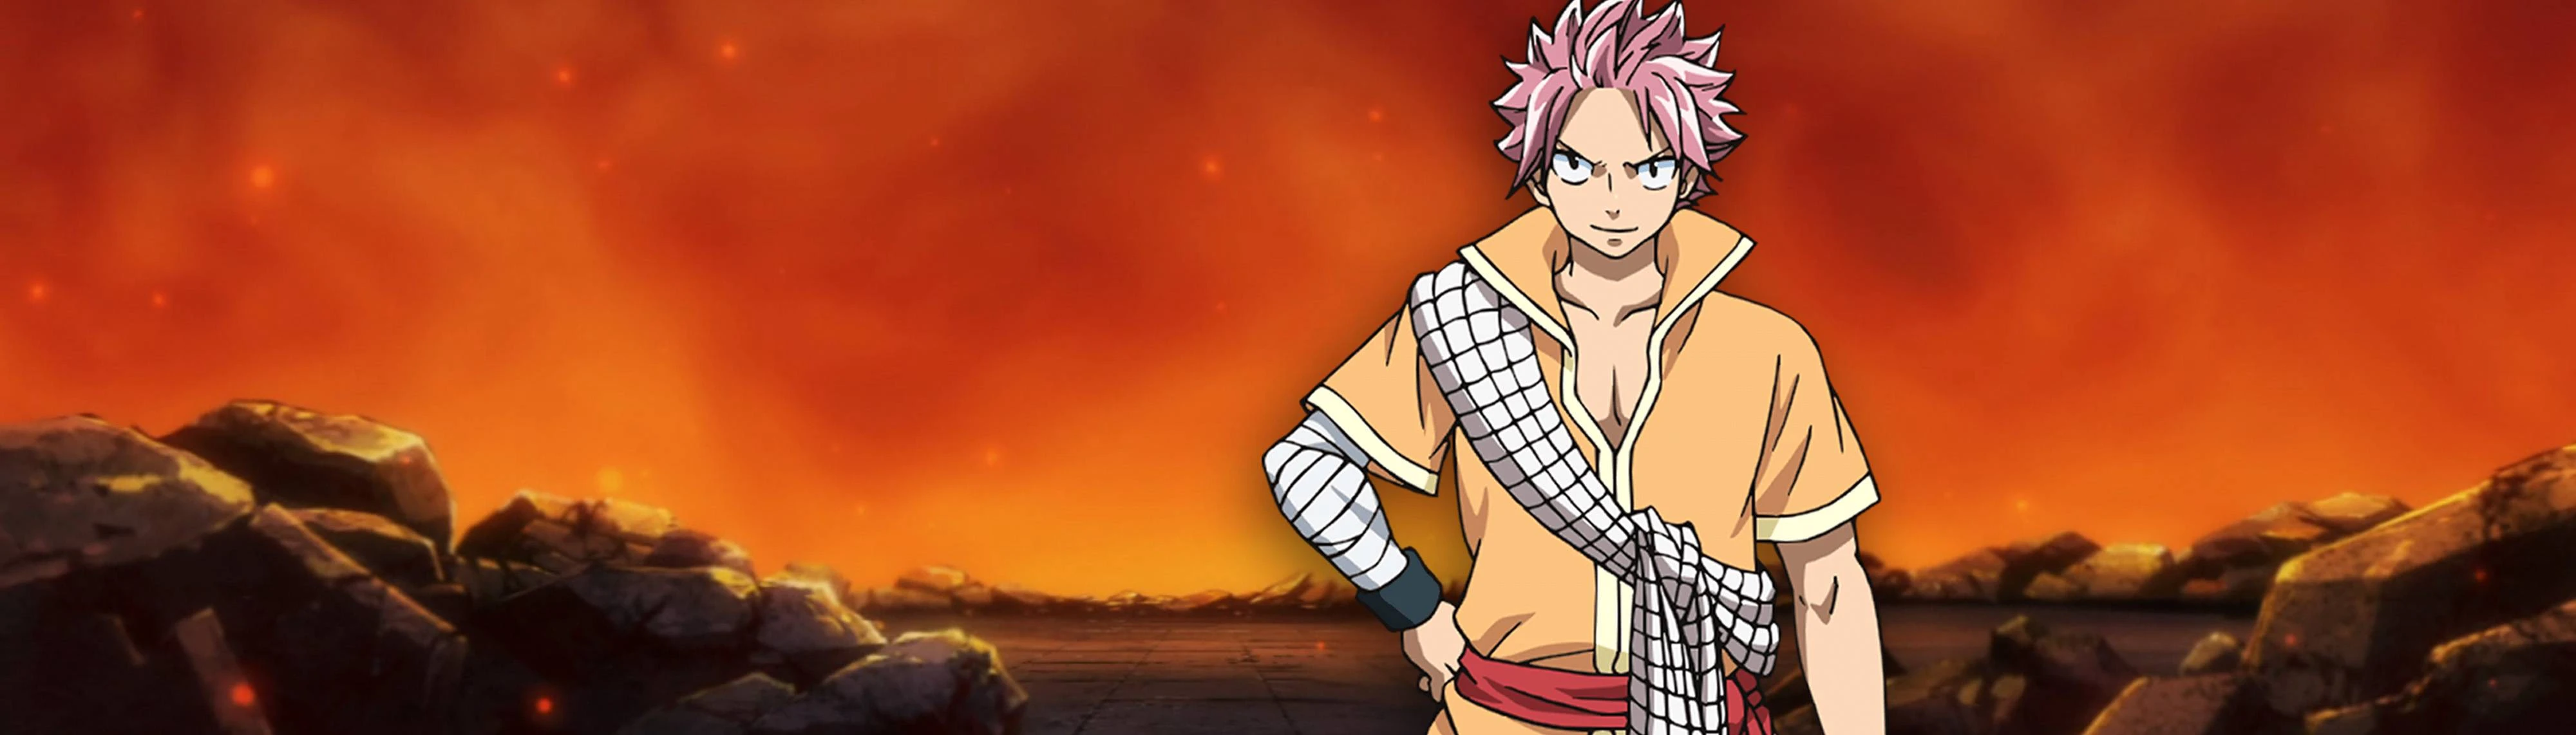 Fairy Tail: Dragon Cry Releases Fiery New Trailer!, Anime News